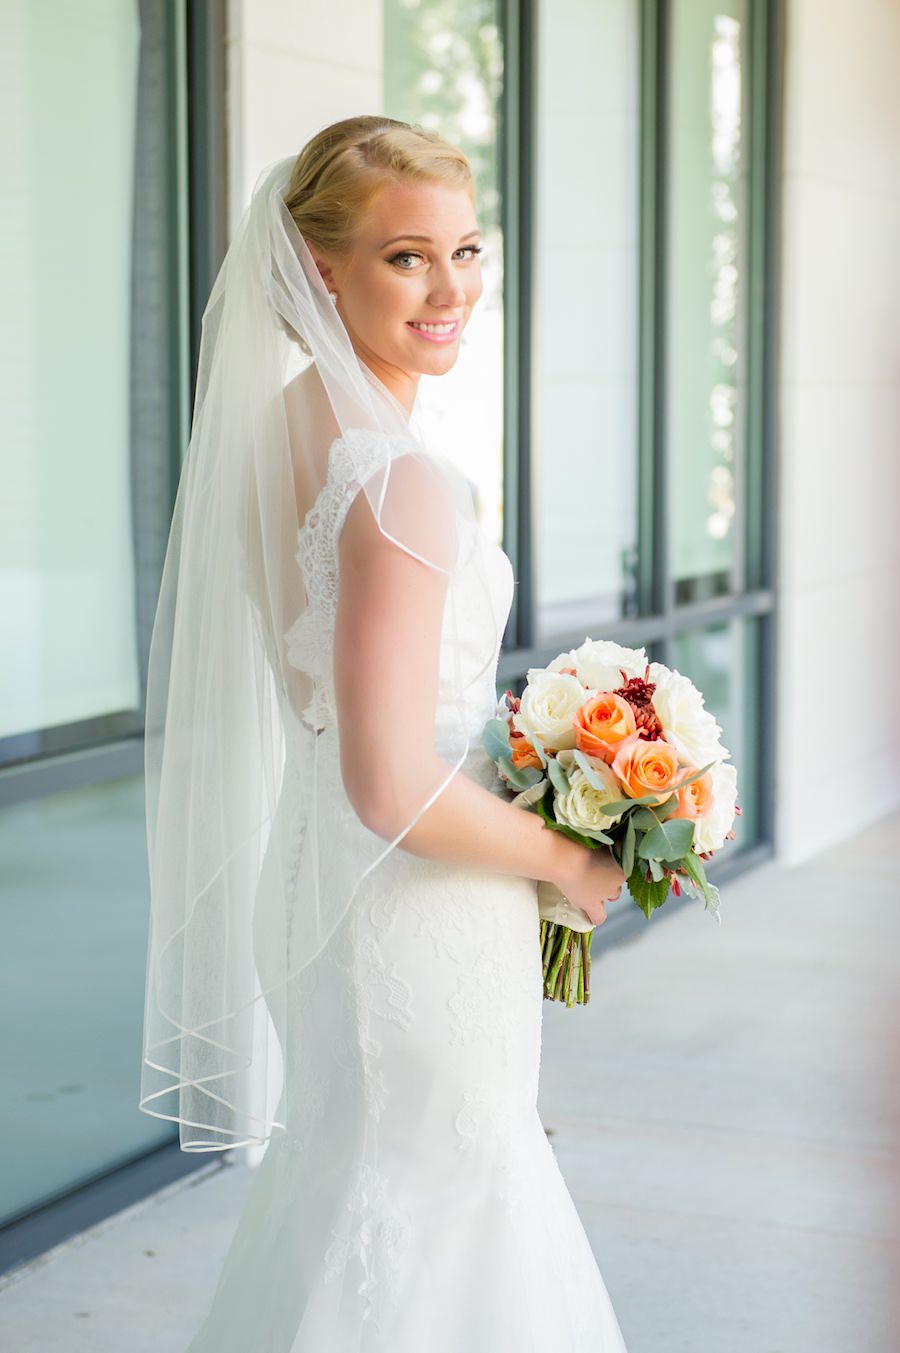 Bridal Wedding Portrait in Open Back Lace Wedding Dress with Wedding Bouquet of Ivory, Orange and Red Flowers | Tampa Bay Wedding Photography Andi Diamond Photography